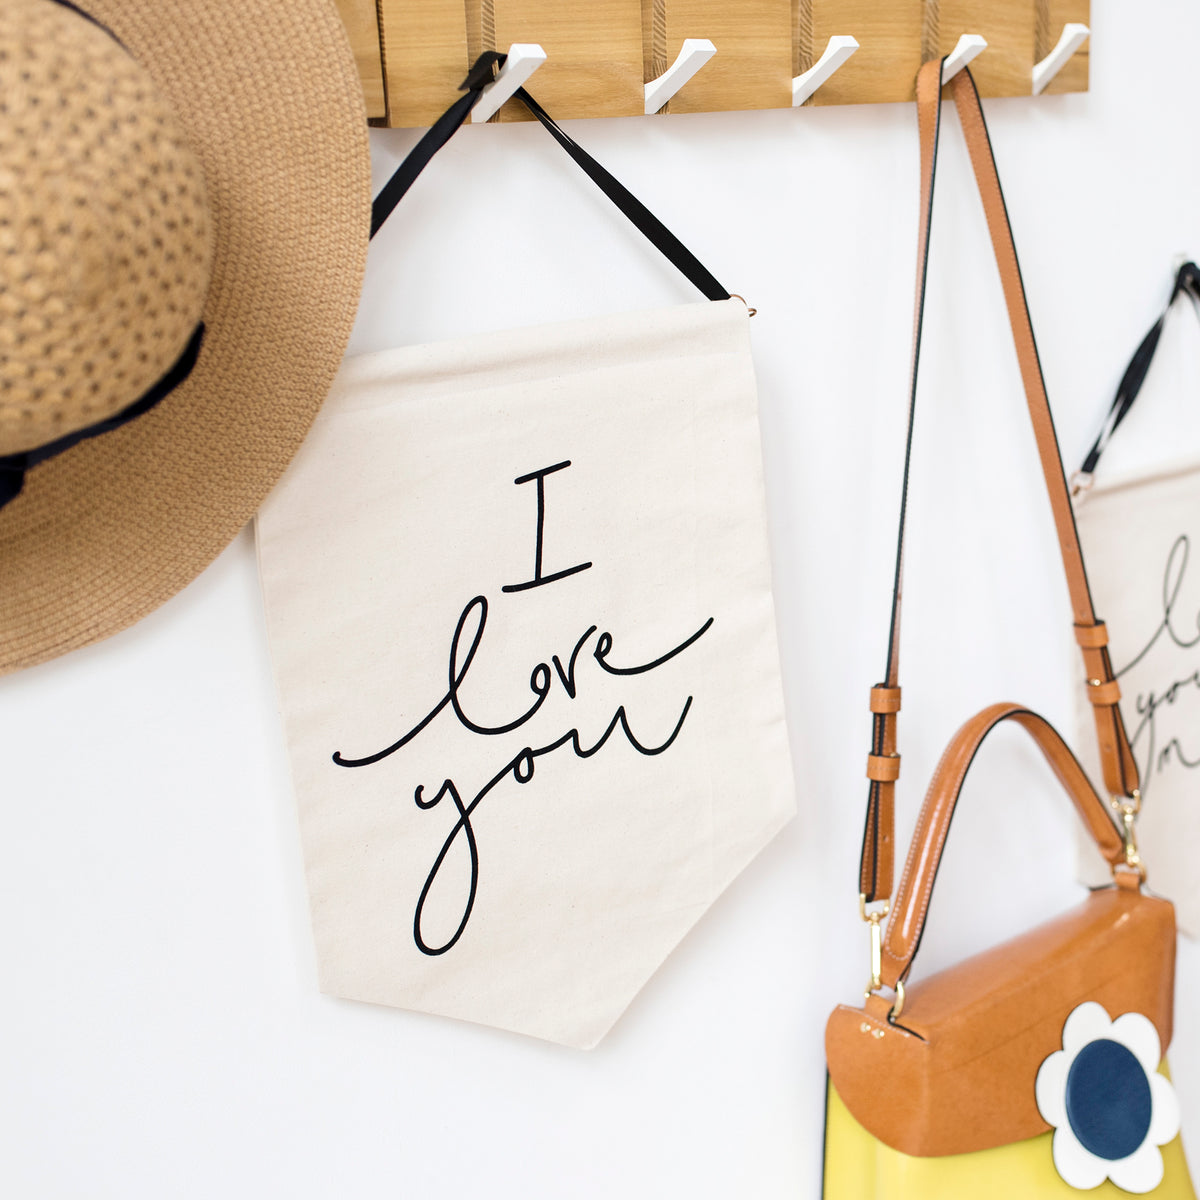 I Love You / Love You More - Handwritten Banners